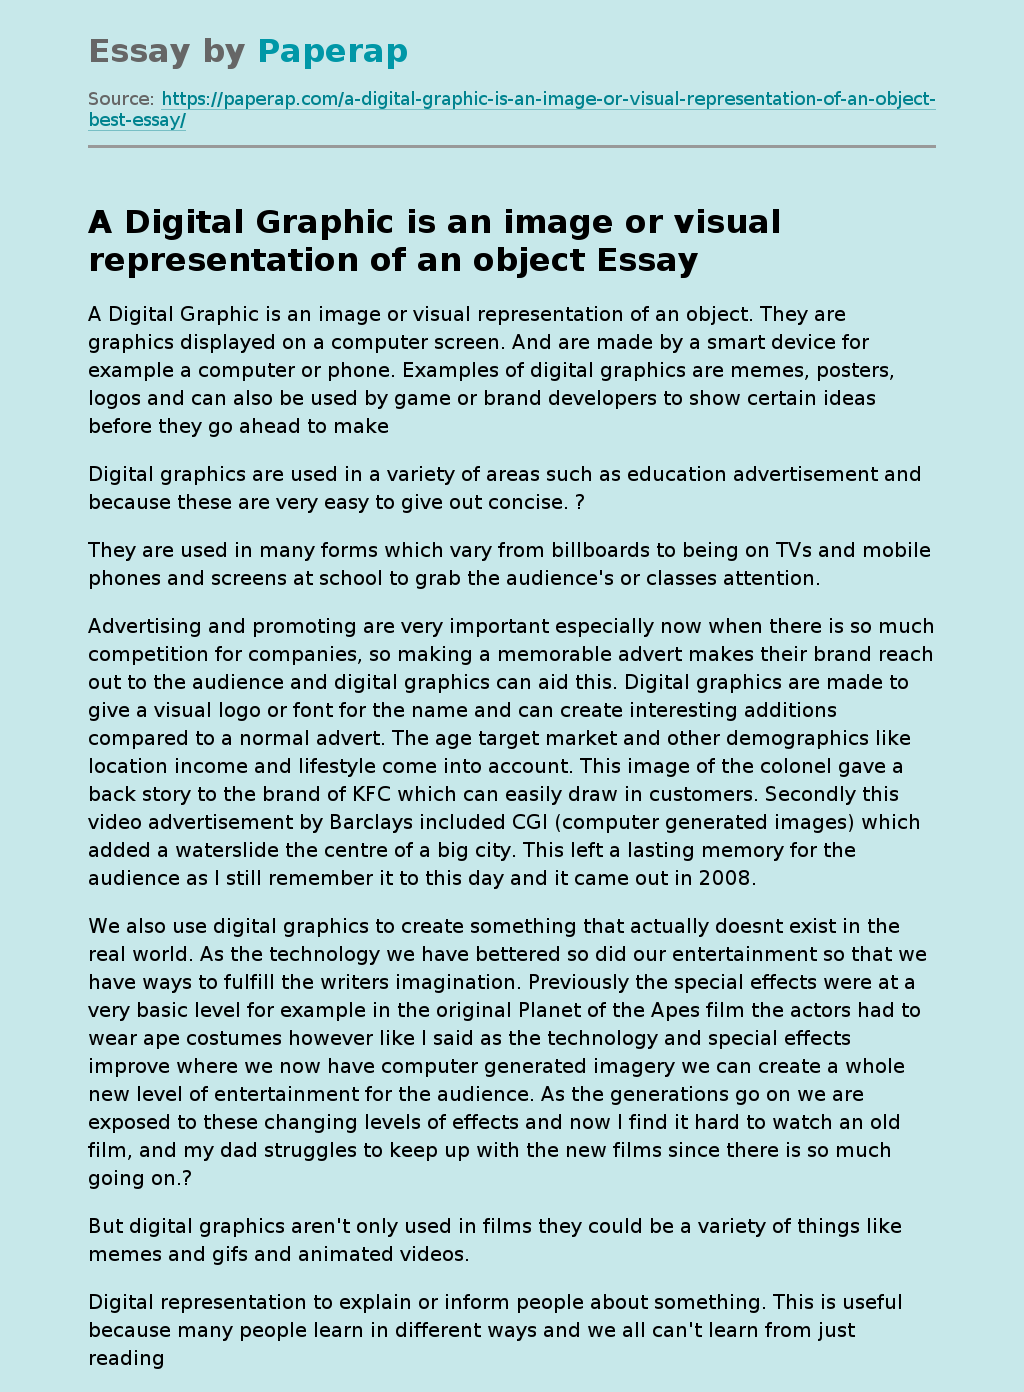 A Digital Graphic is an image or visual representation of an object